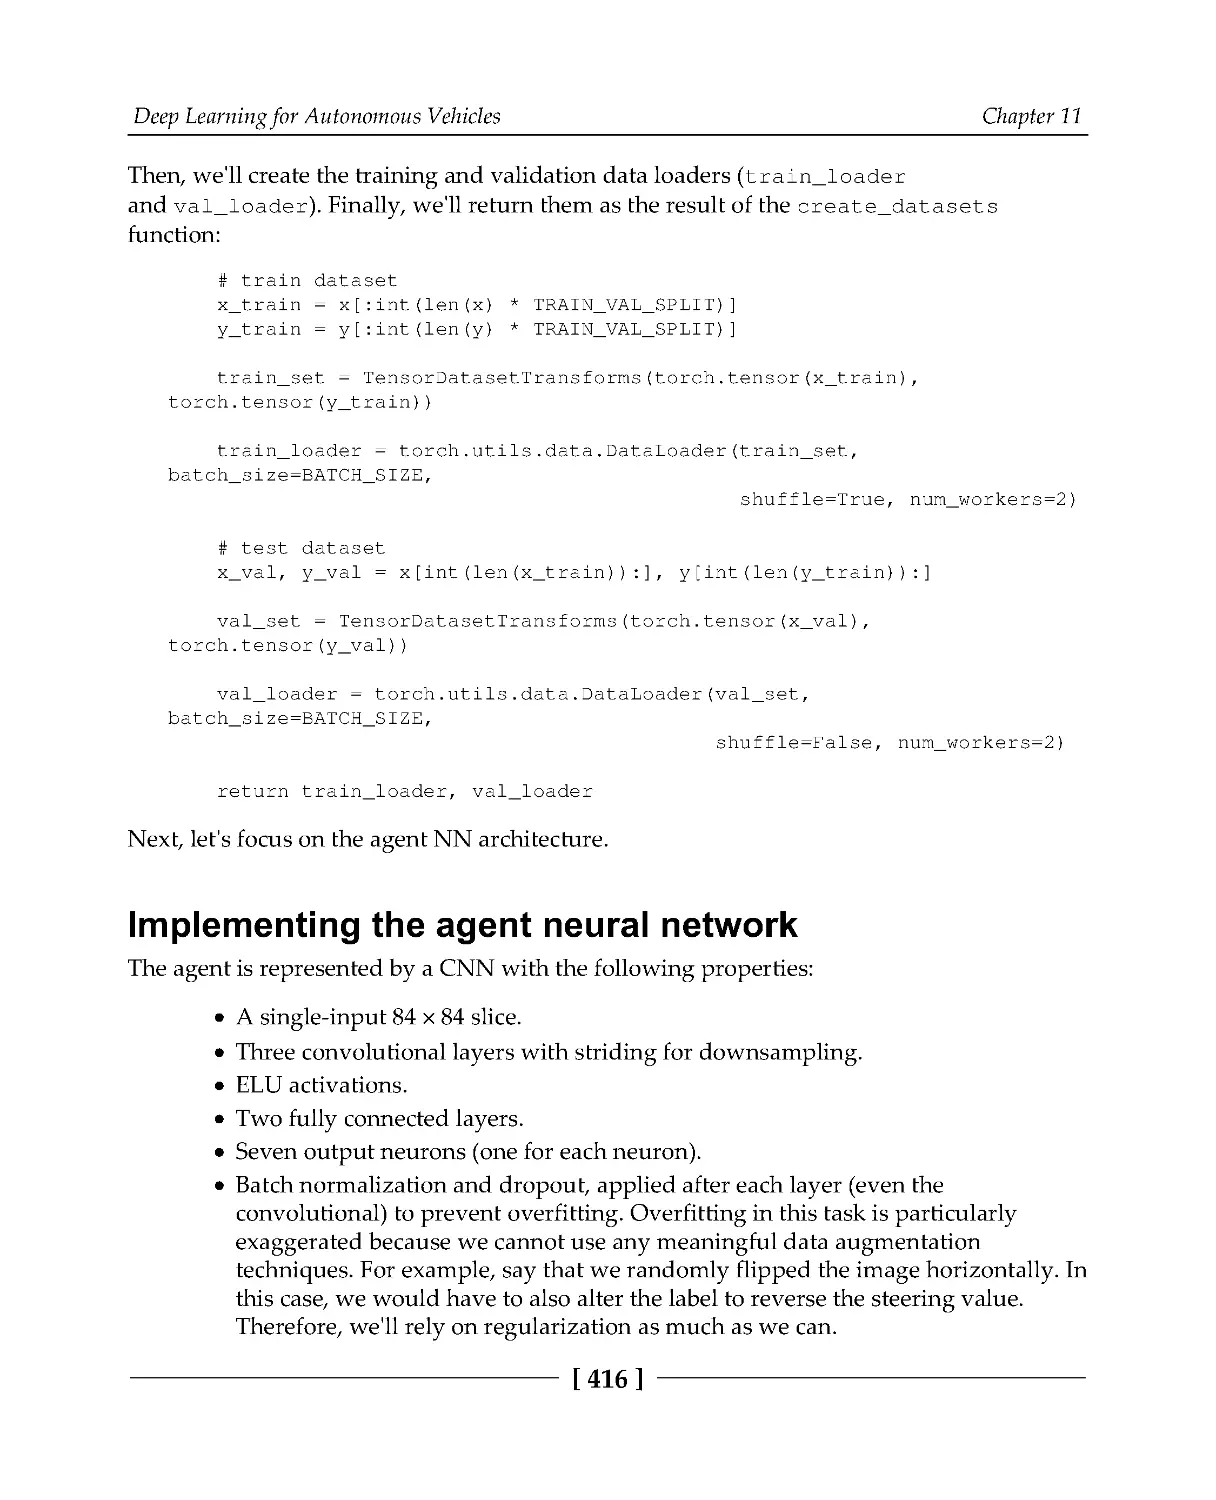 Implementing the agent neural network